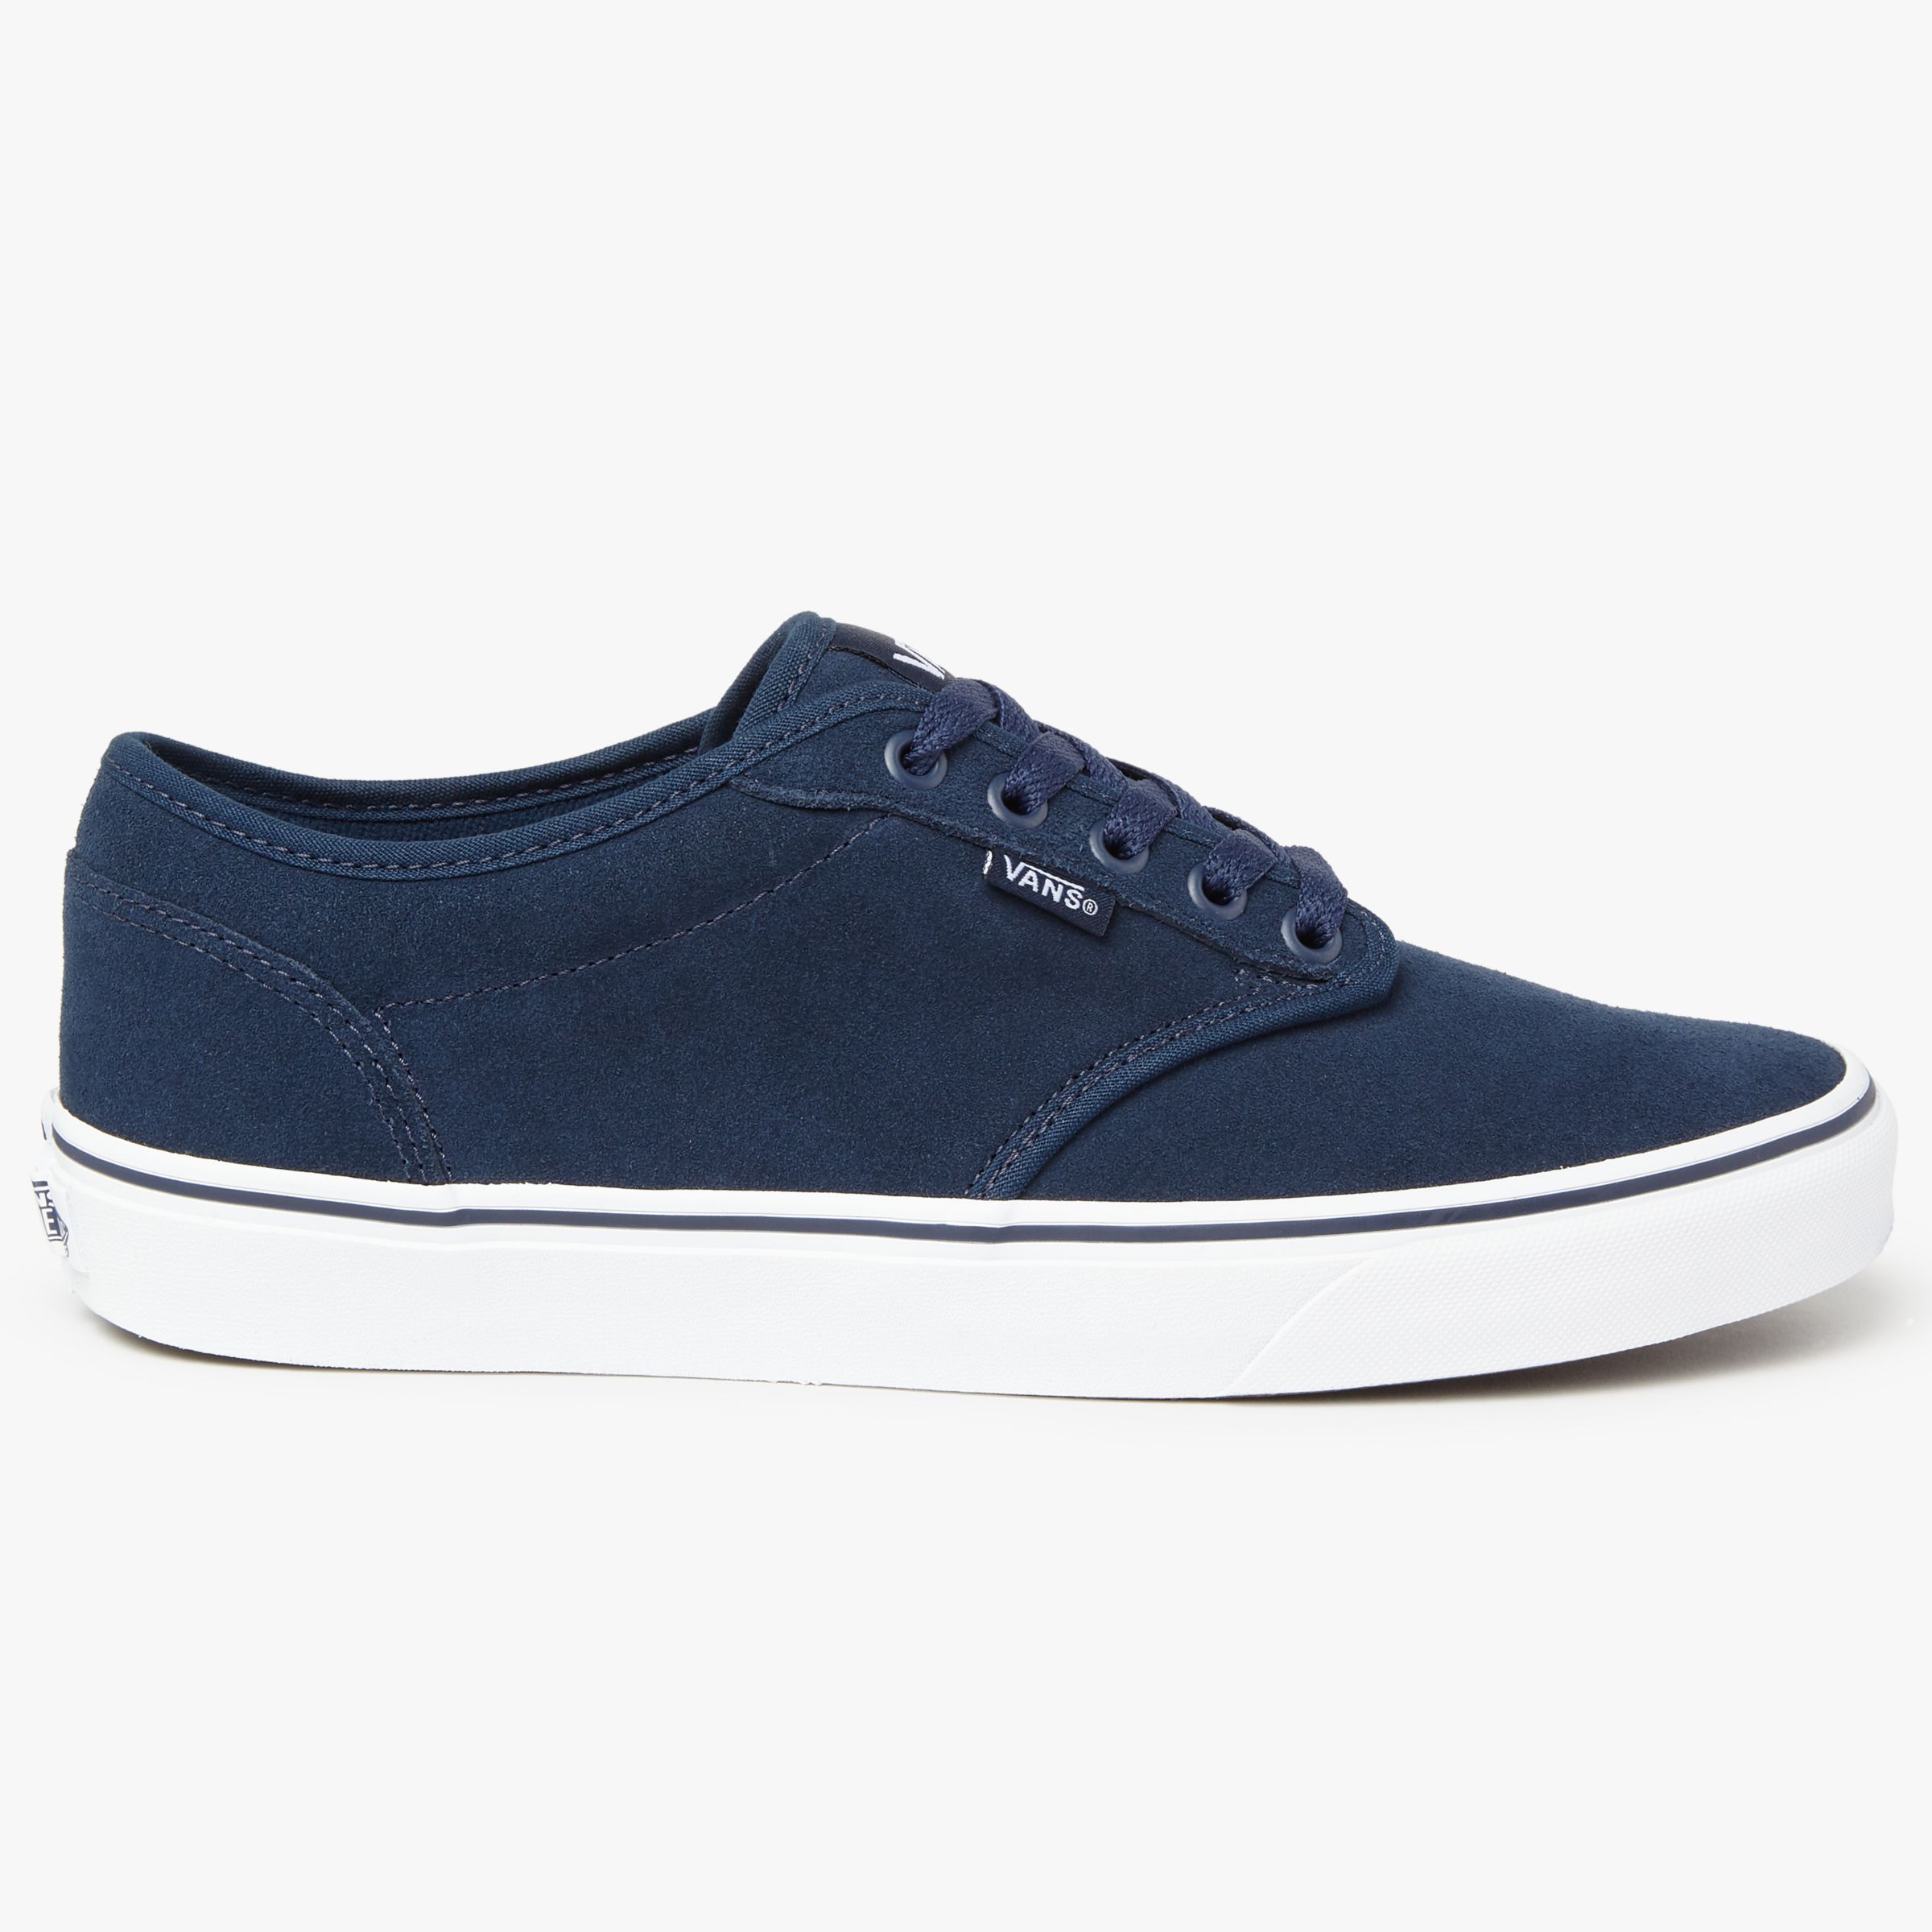 Vans Atwood Suede Trainers, Dress Blues